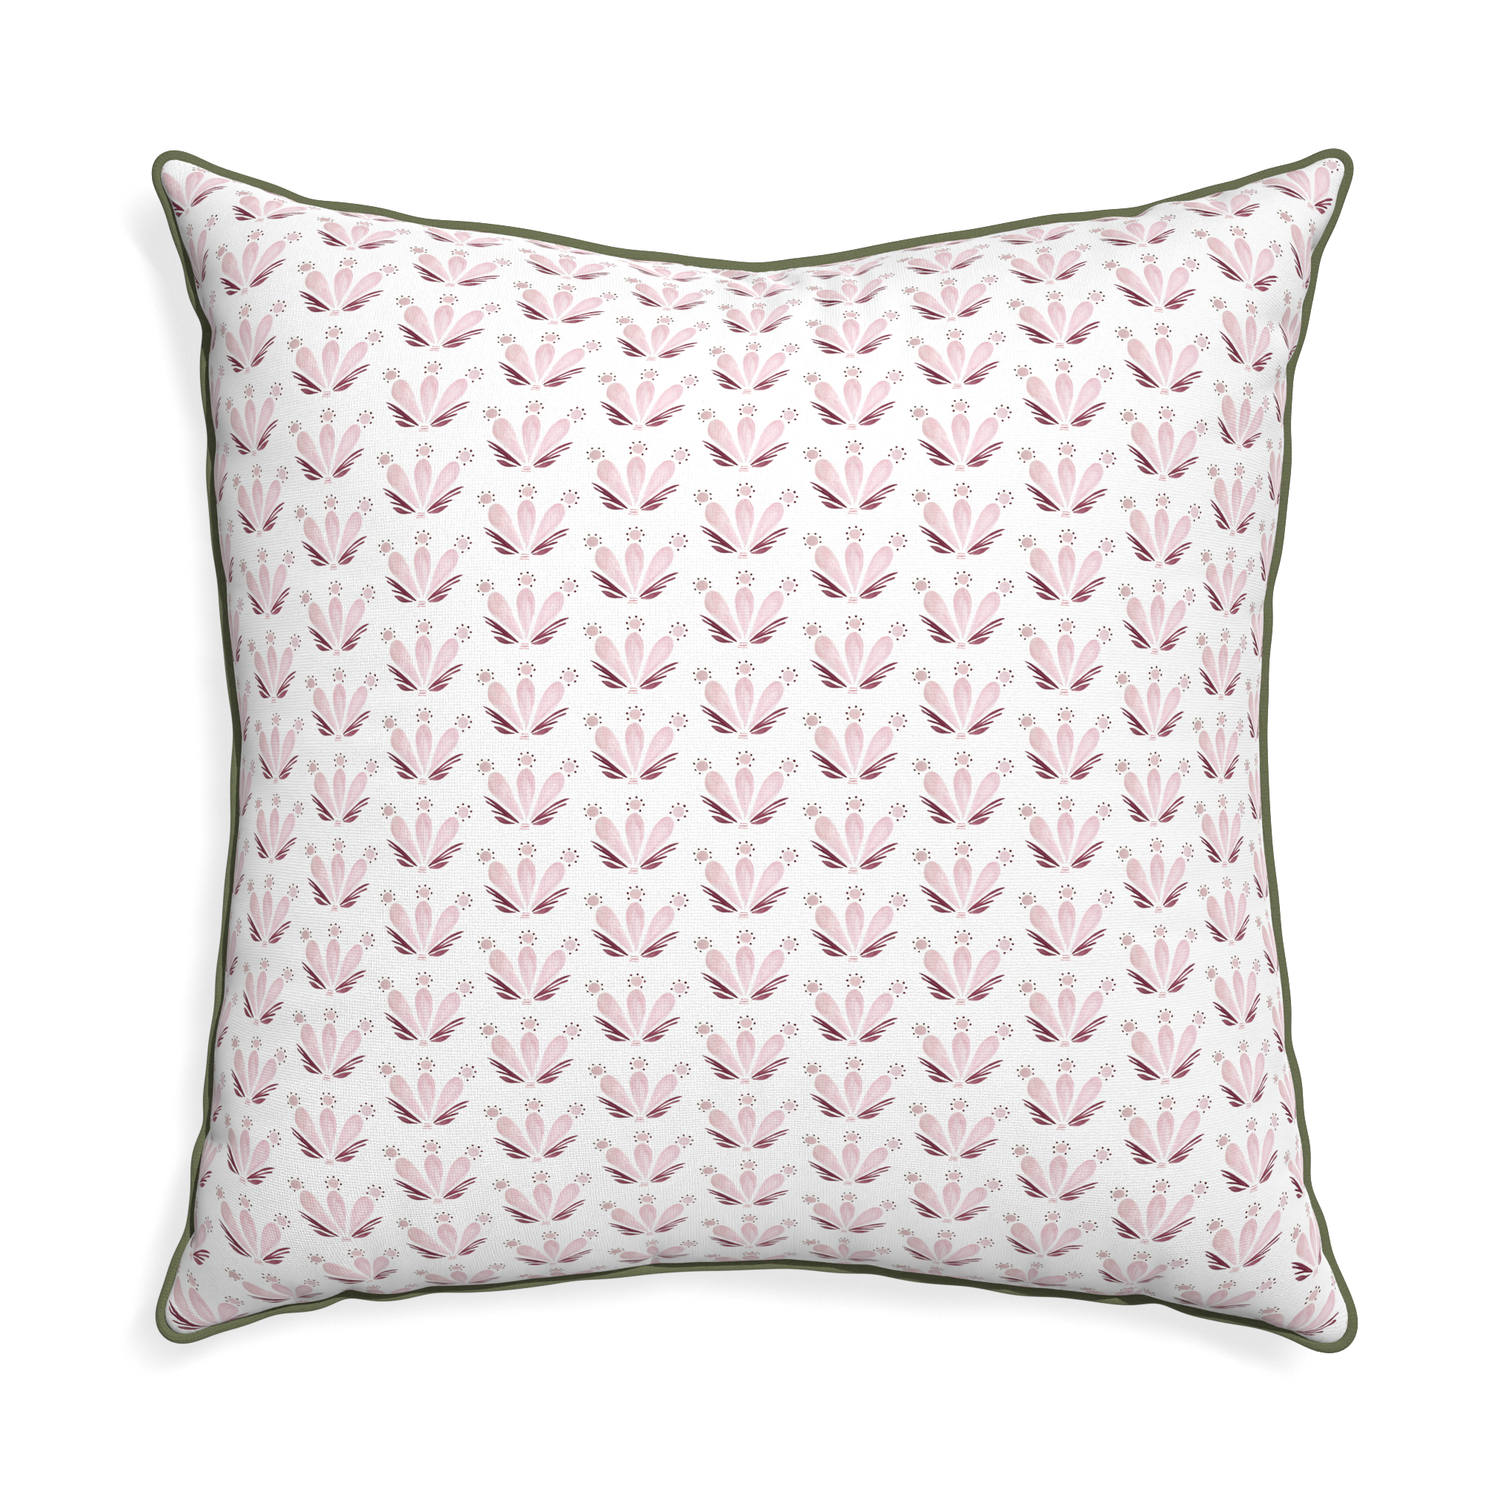 Euro-sham serena pink custom pink & burgundy drop repeat floralpillow with f piping on white background